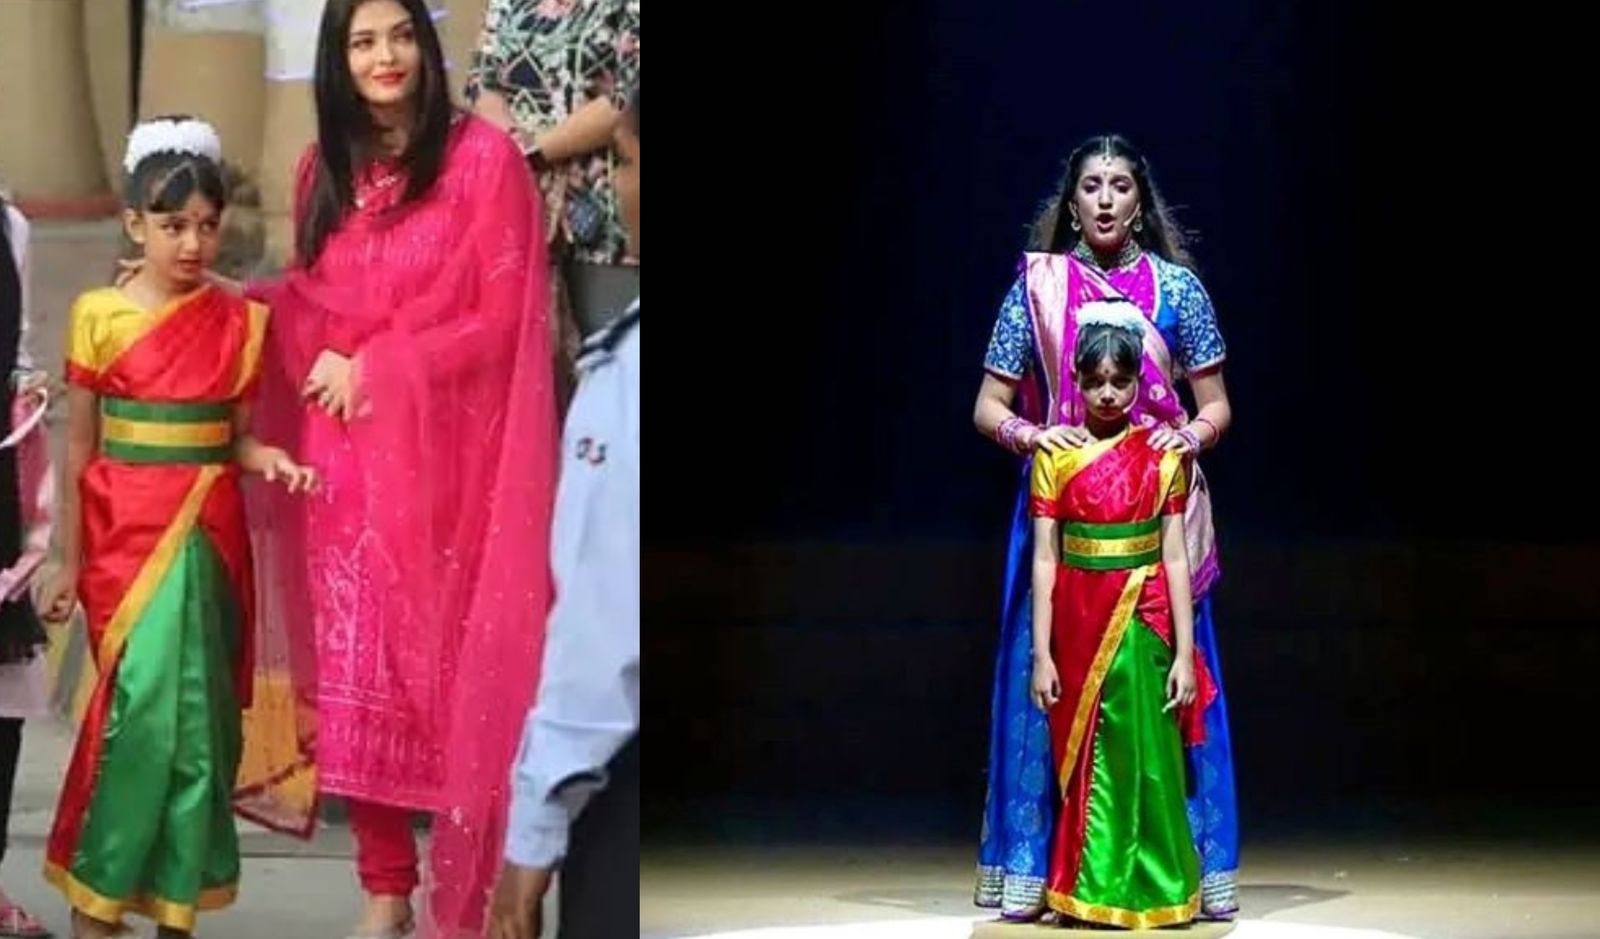 Aaradhya Bachchan Delivers A Powerful Performance On Women Empowerment In A Play, Amitabh Bachchan Watches On Proudly  